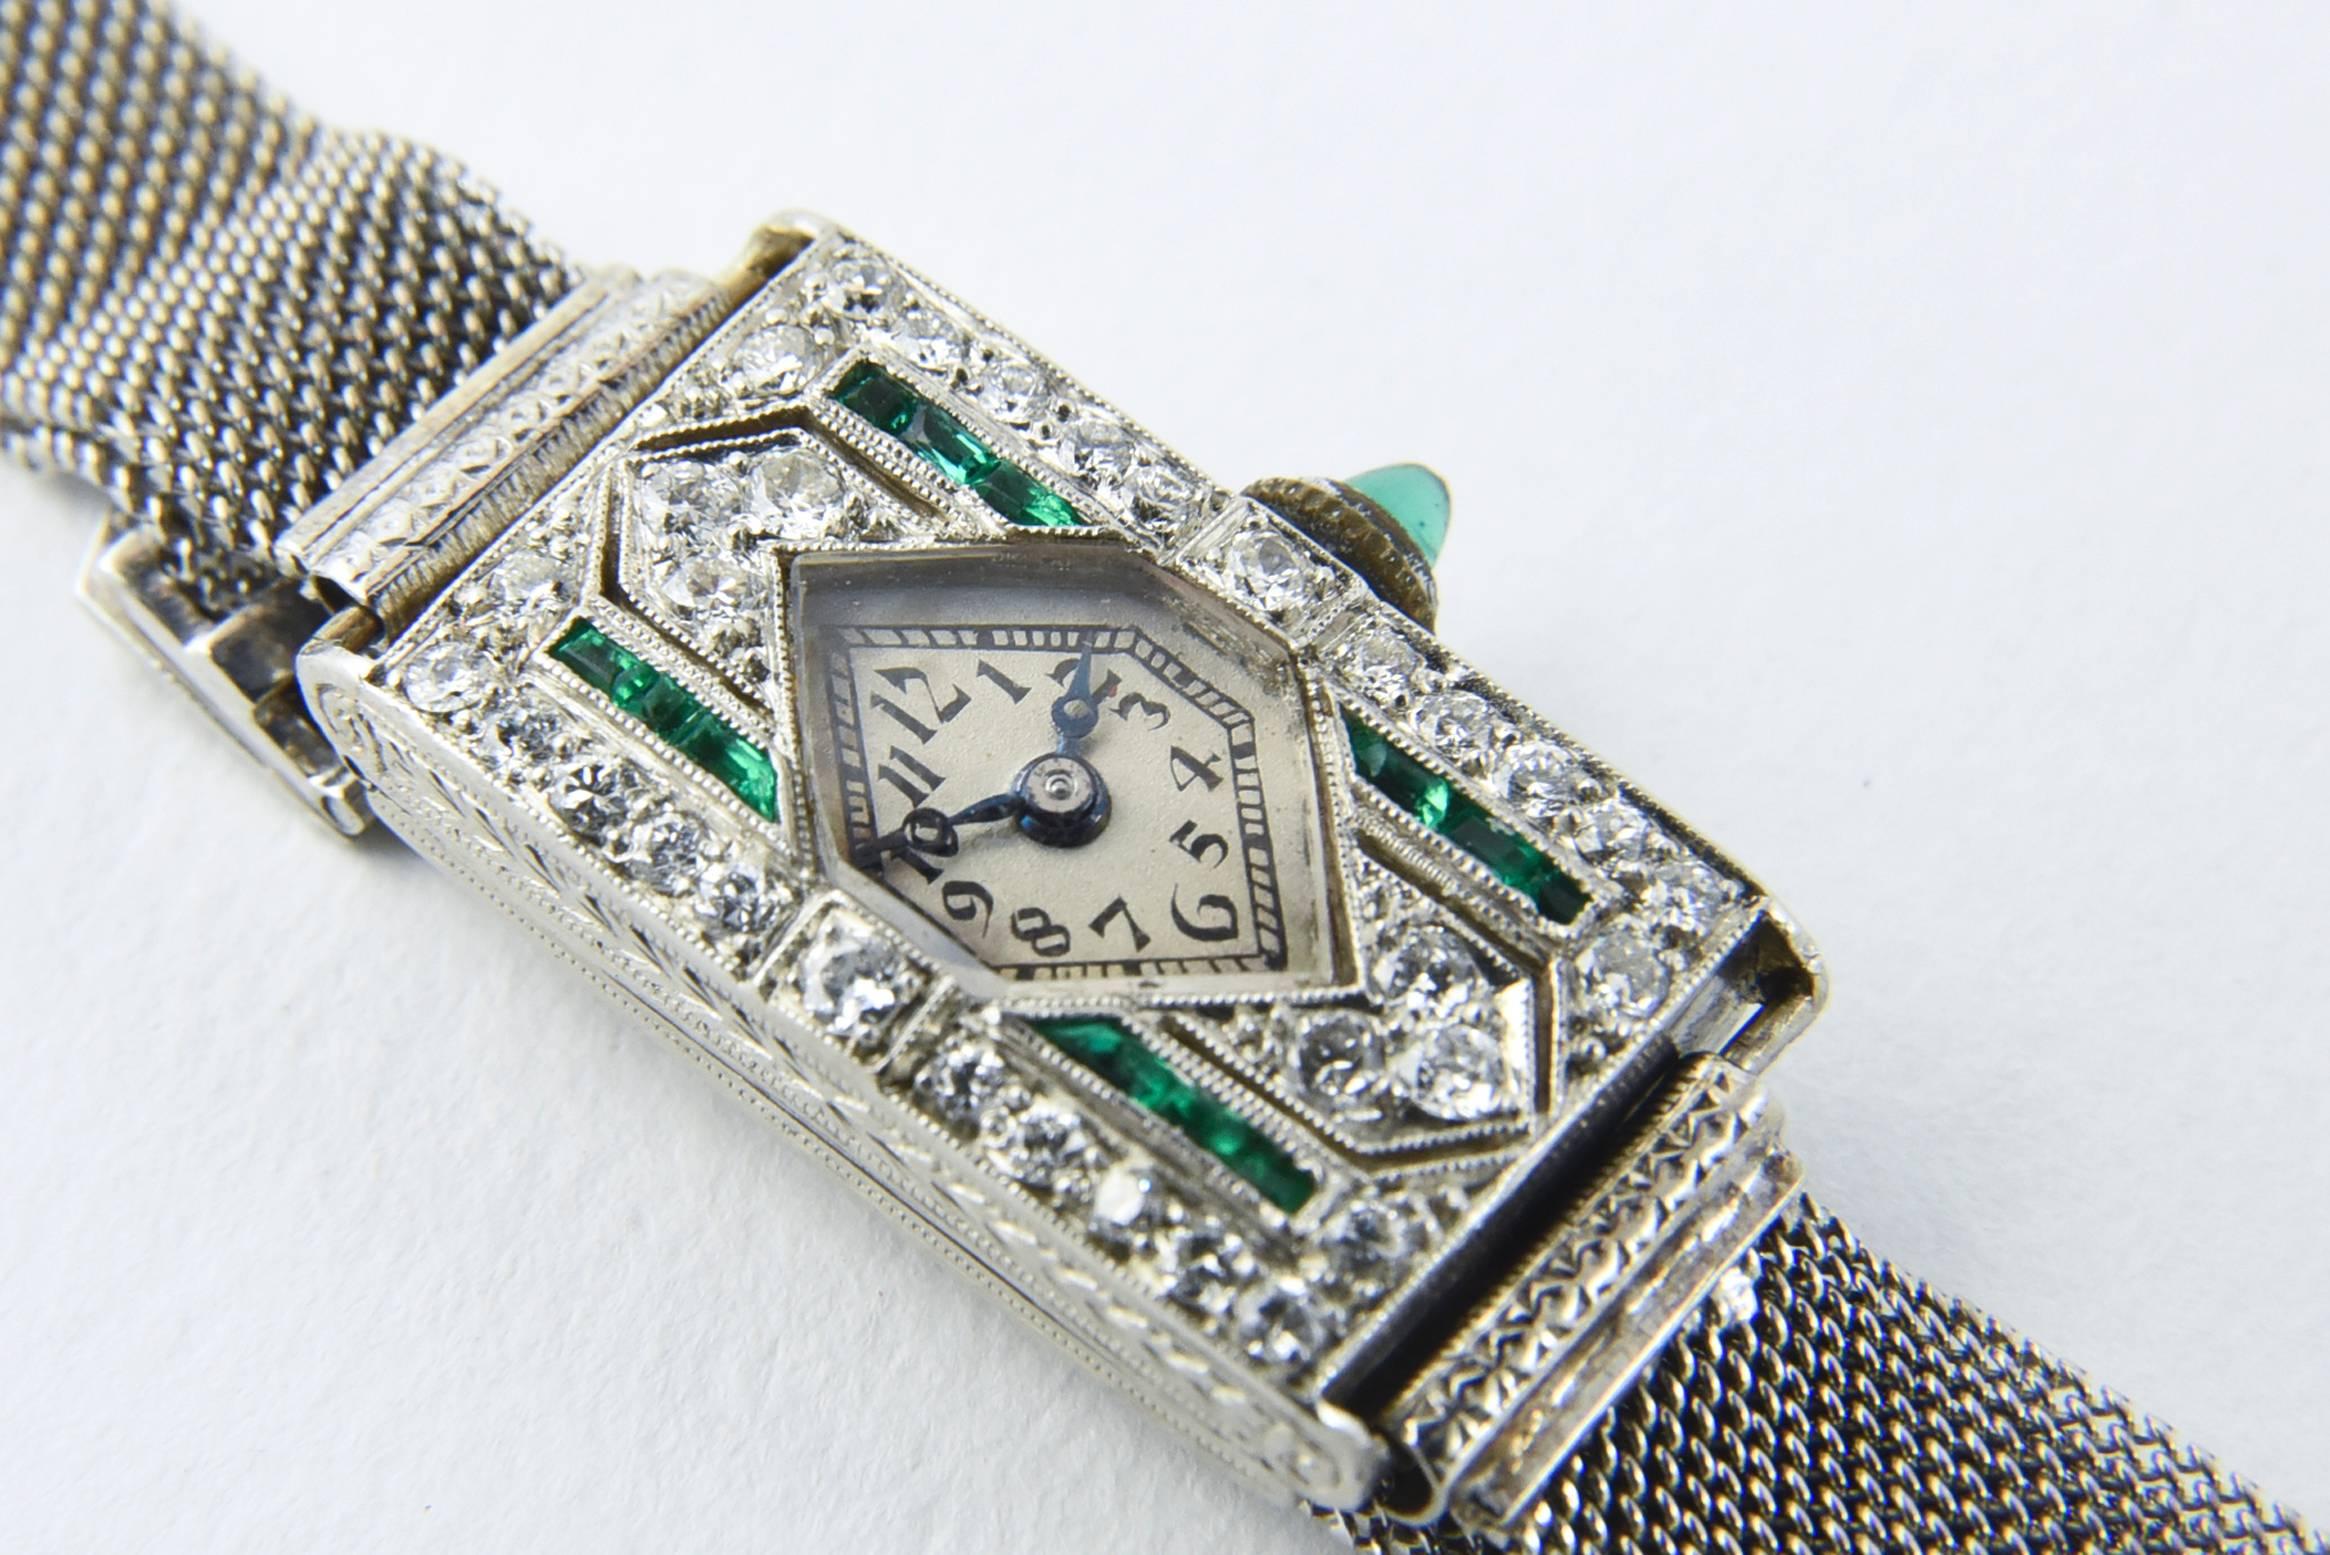 Antique Art Deco Glycine Watch featuring a platinum case with a diamond shaped face and channel set emeralds and prong set diamonds on a platinum mesh band.  Glycine Swiss movement.

Measurement below is the case with out stem.